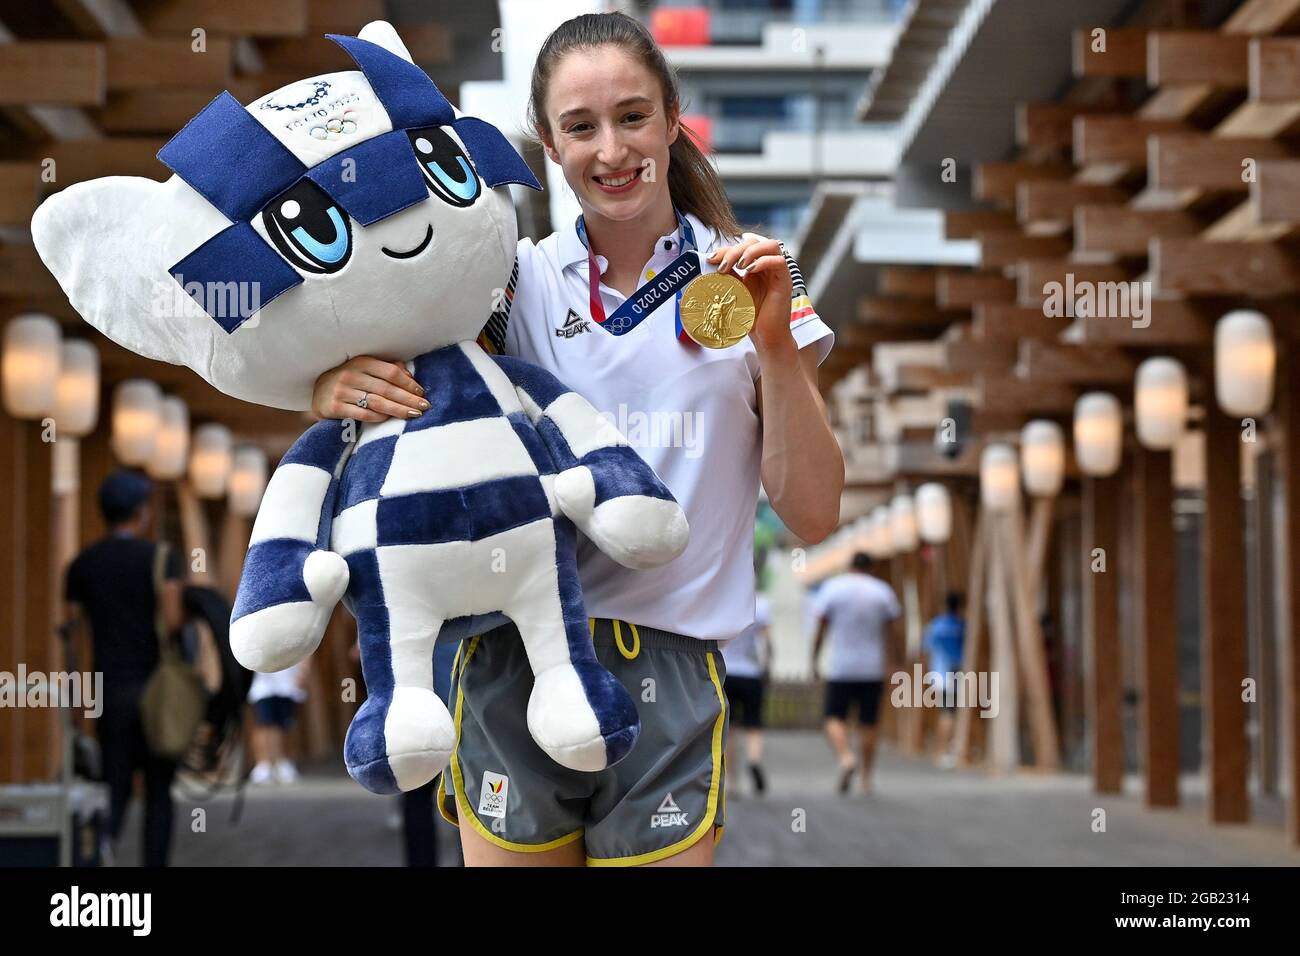 athlete Nina Derwael poses for the photographer on day 11 of the 'Tokyo 2020 Olympic Games' in Tokyo, Japan on Monday 02 August 2021. The postponed 20 Stock Photo